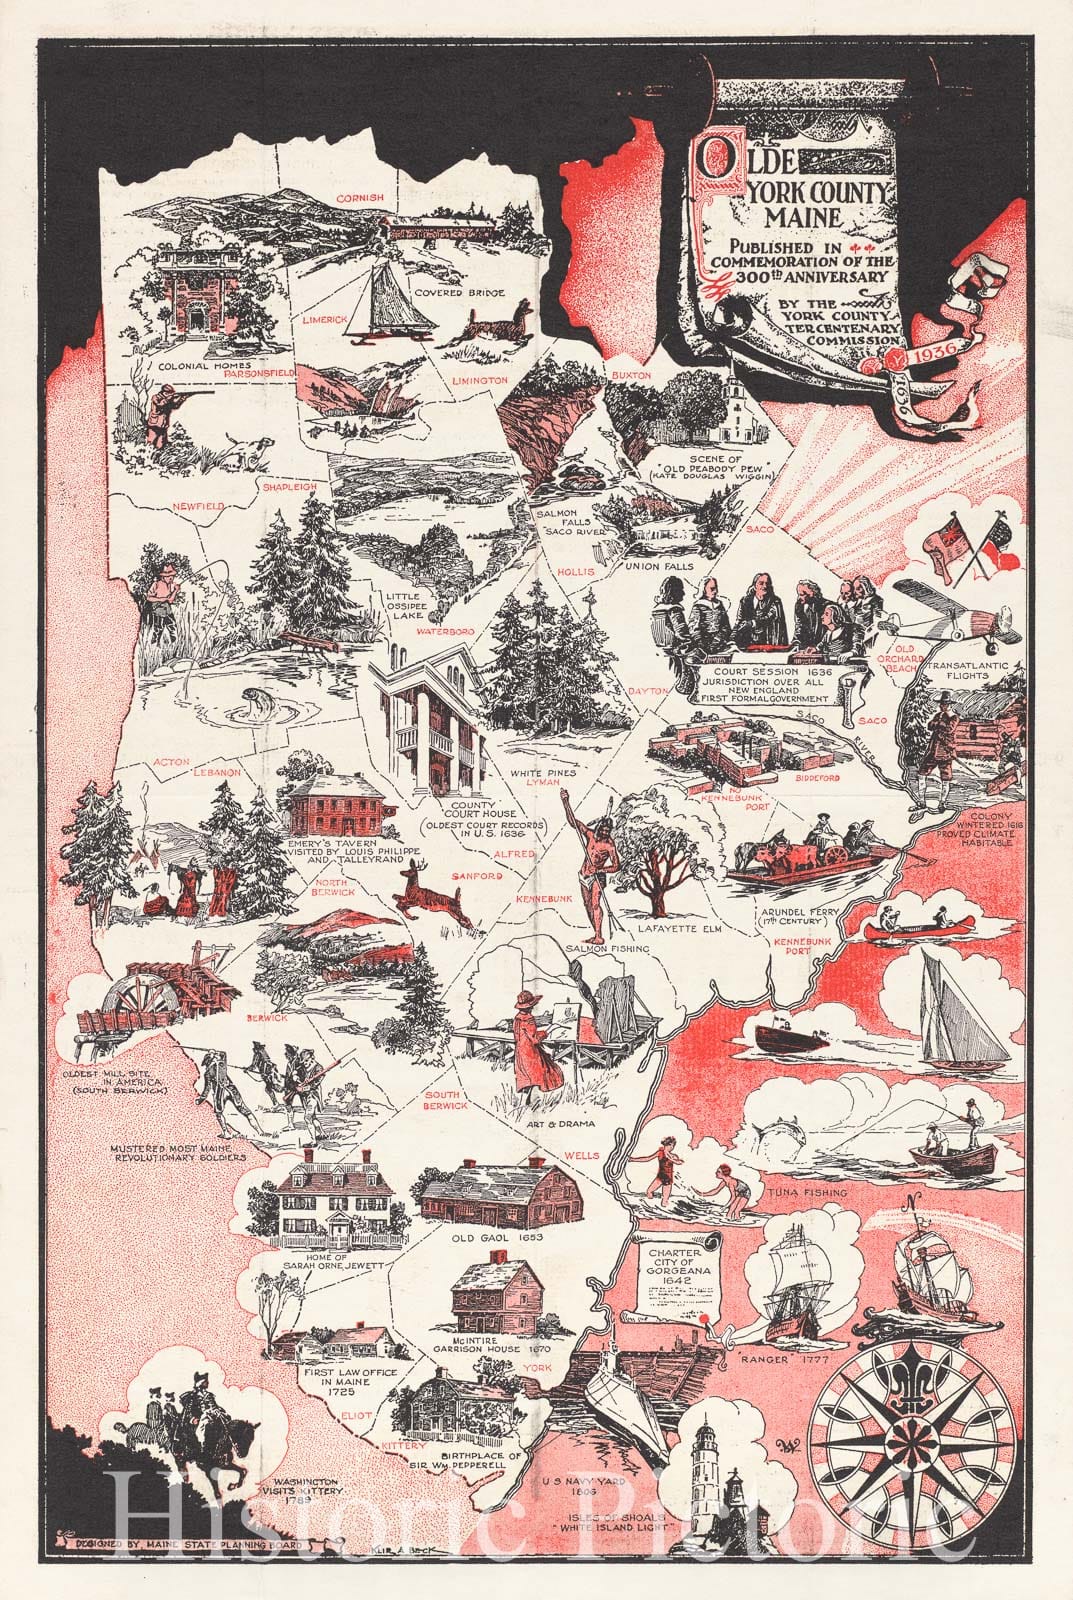 Historic Map : Pictorial State Planning Board Map of York County, Maine, 1936, Vintage Wall Art